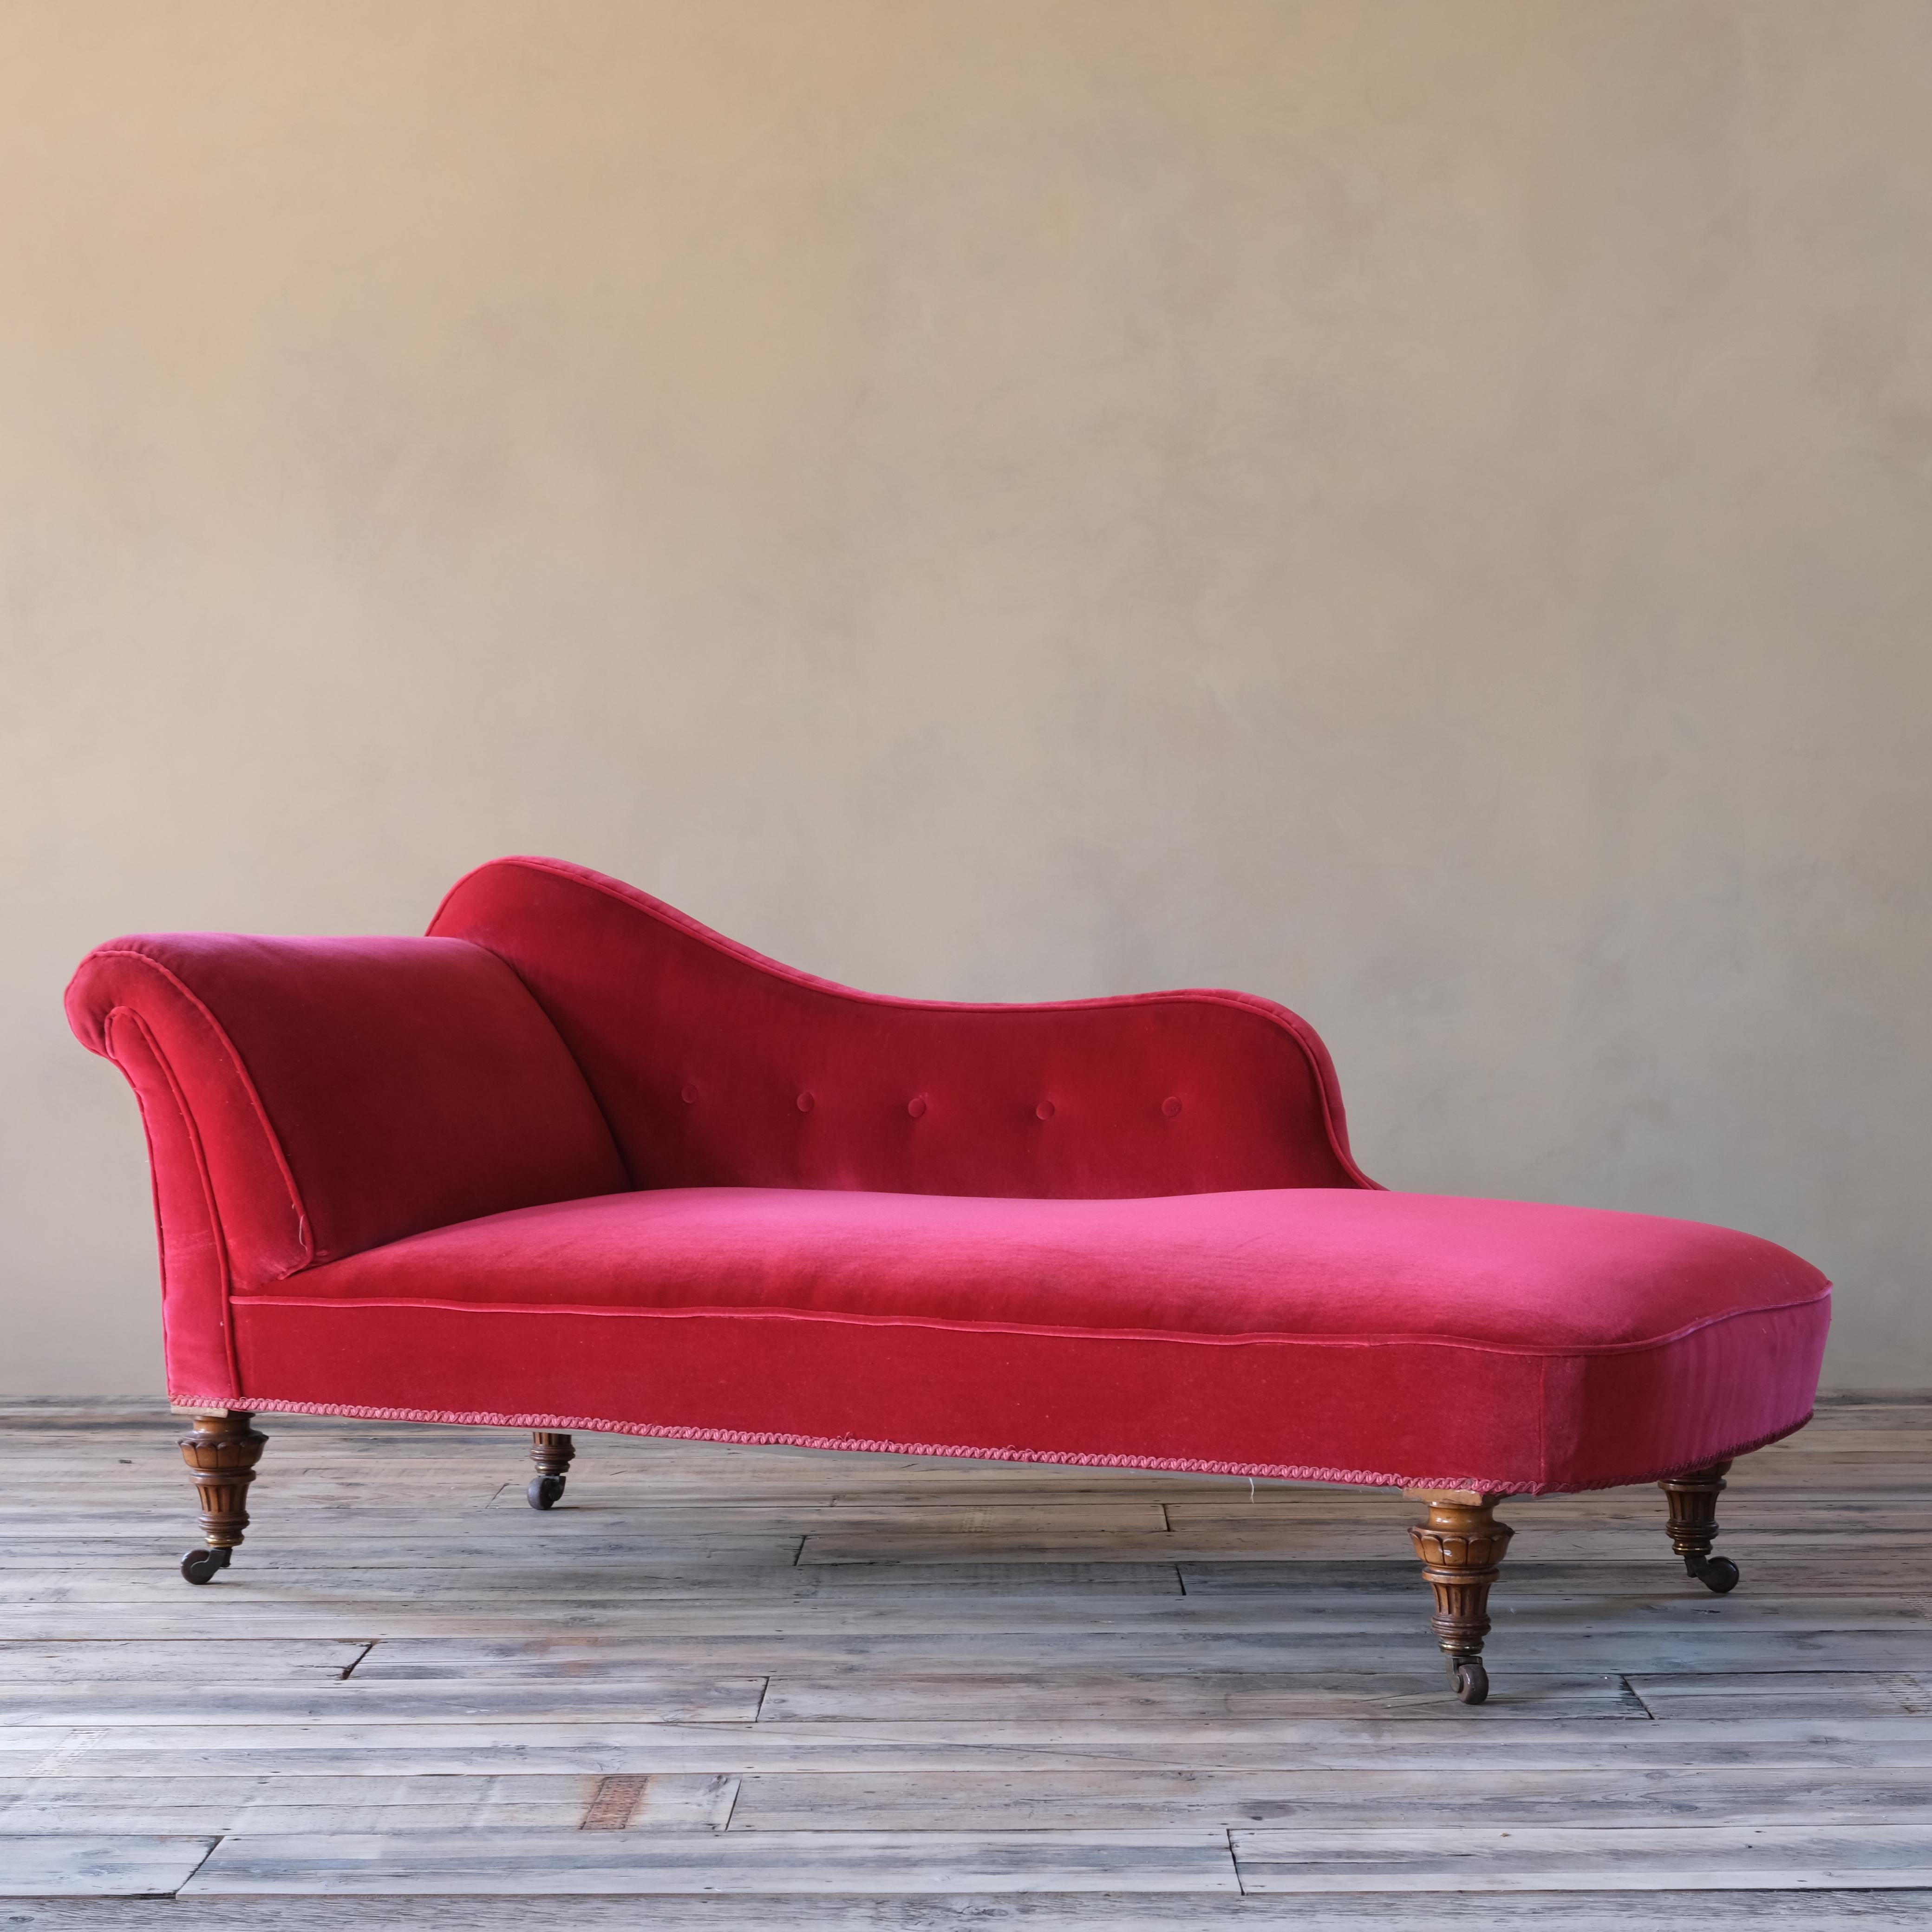 A very well formed 19th century chaise lounge raised on 4 walnut legs that are of the finest quality with the original casters. The upholstery is a deep red velvet that does show signs of wear but is usable however upholstery. 

structurally sound